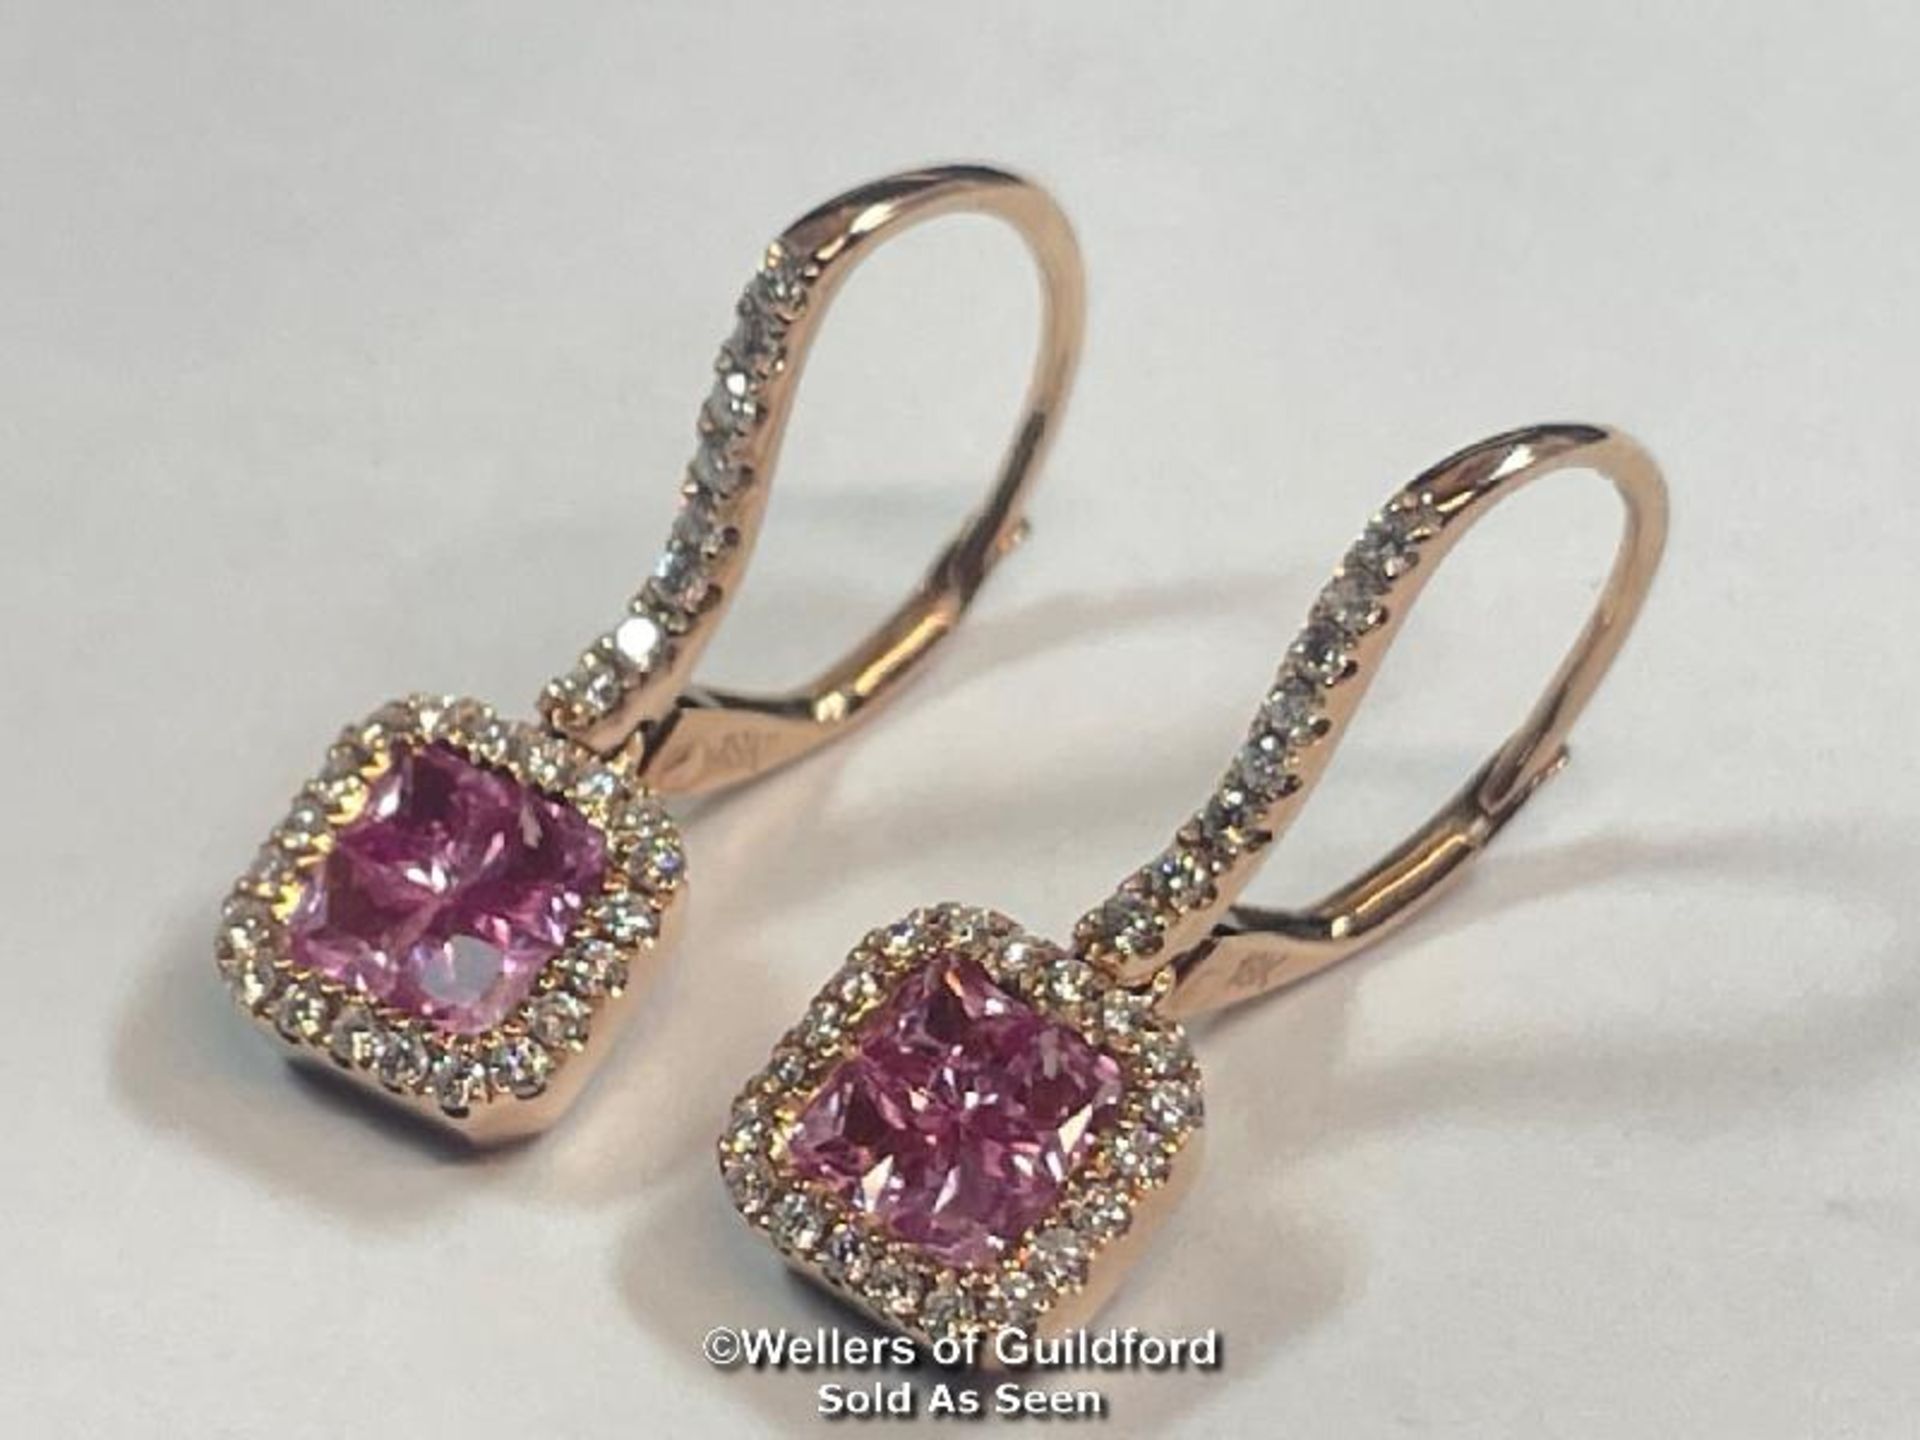 *DIAMOND AND PINK SAPPHIRE DROP EARINGS WITH HOOK AND CLIP FITTINGS STAMPED 18K, ESTIMATED DIAMOND